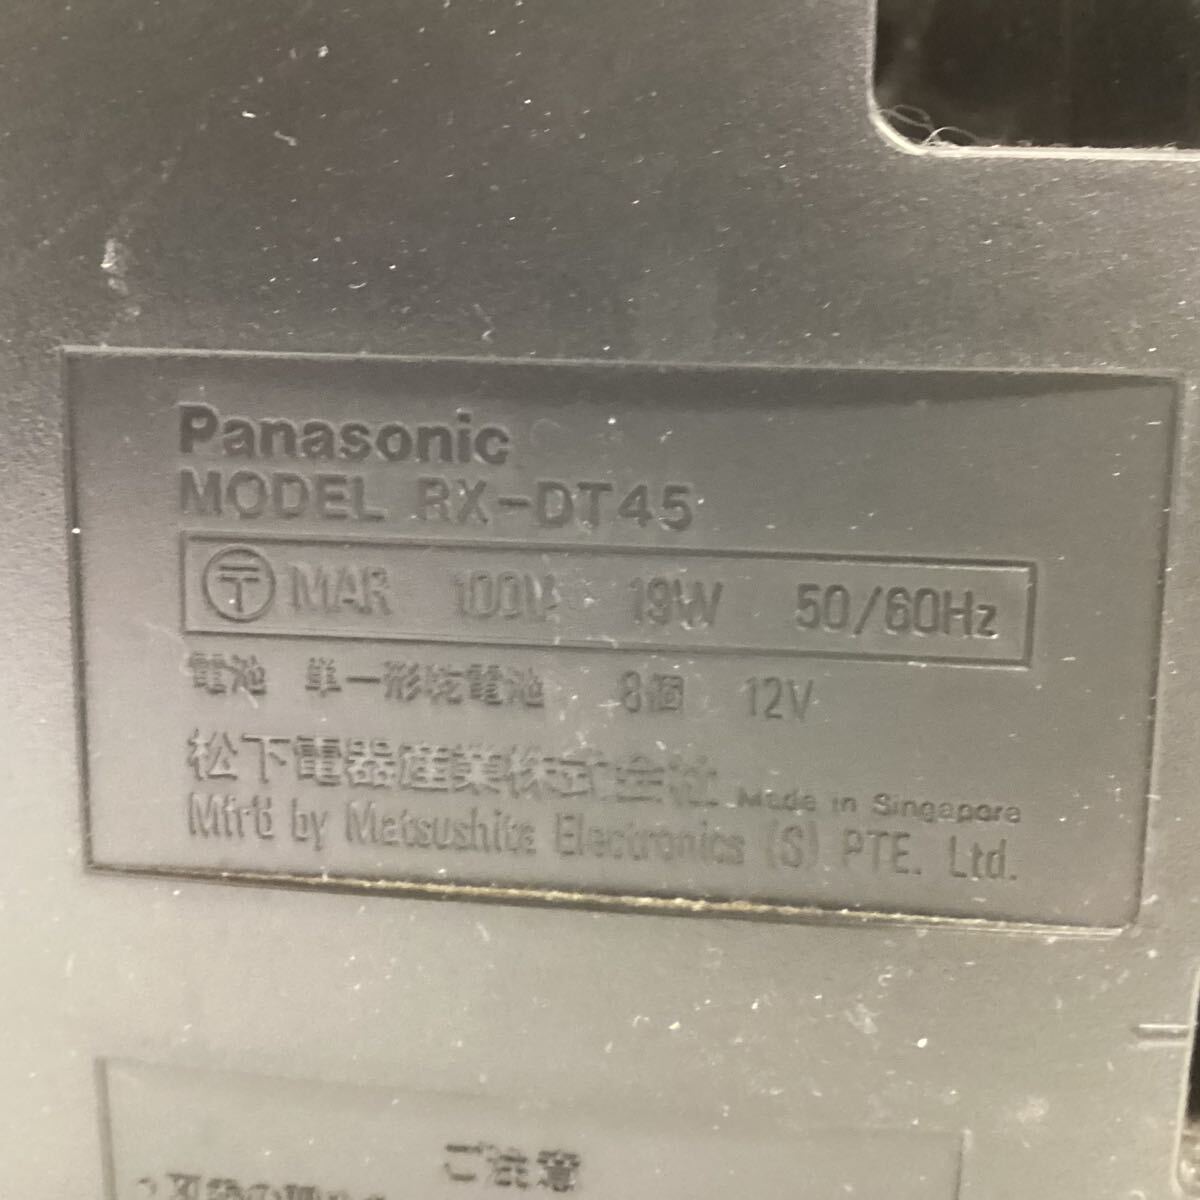 Panasonic double radio-cassette RX-DT45 code less 95 year made U53